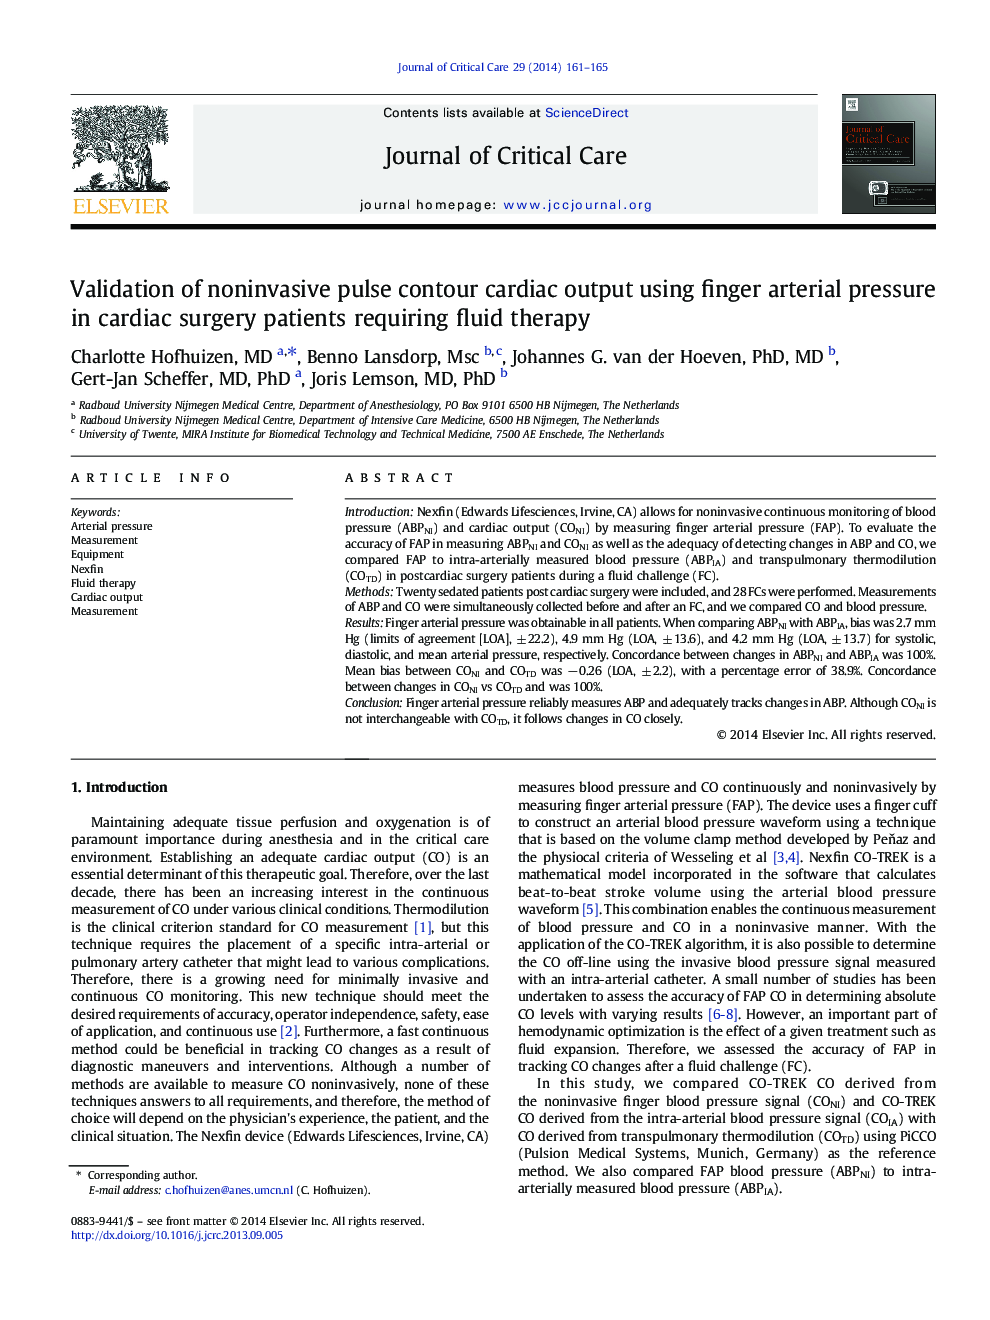 Validation of noninvasive pulse contour cardiac output using finger arterial pressure in cardiac surgery patients requiring fluid therapy